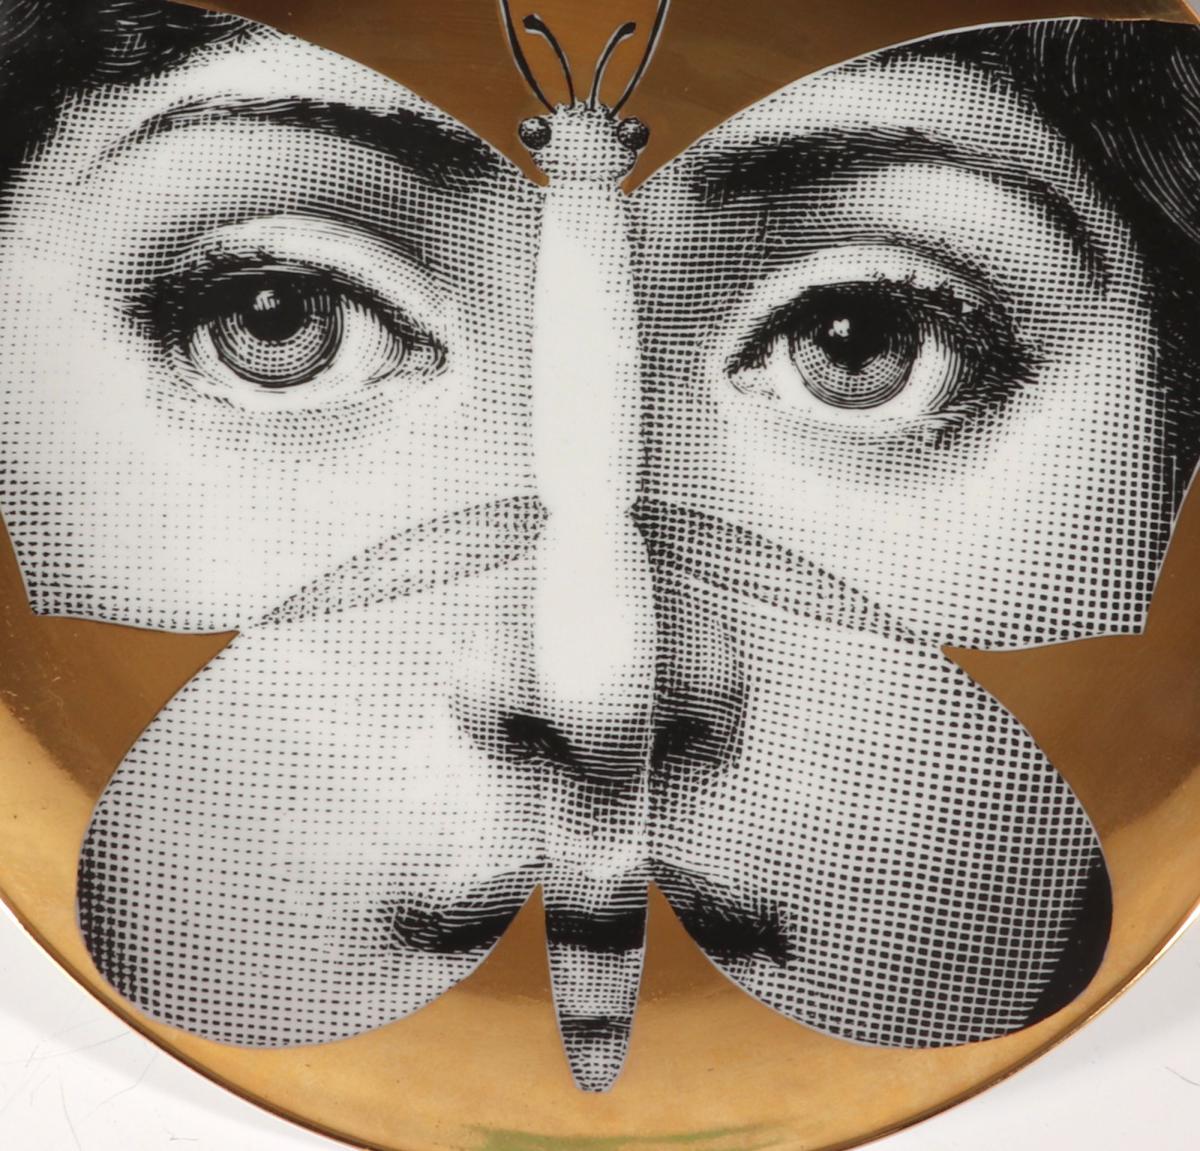 Fornasetti Themes & Variations Gold Plate, Butterfly, Tema E Variazioni, Pattern Number 96, Barnaba Fornasetti.